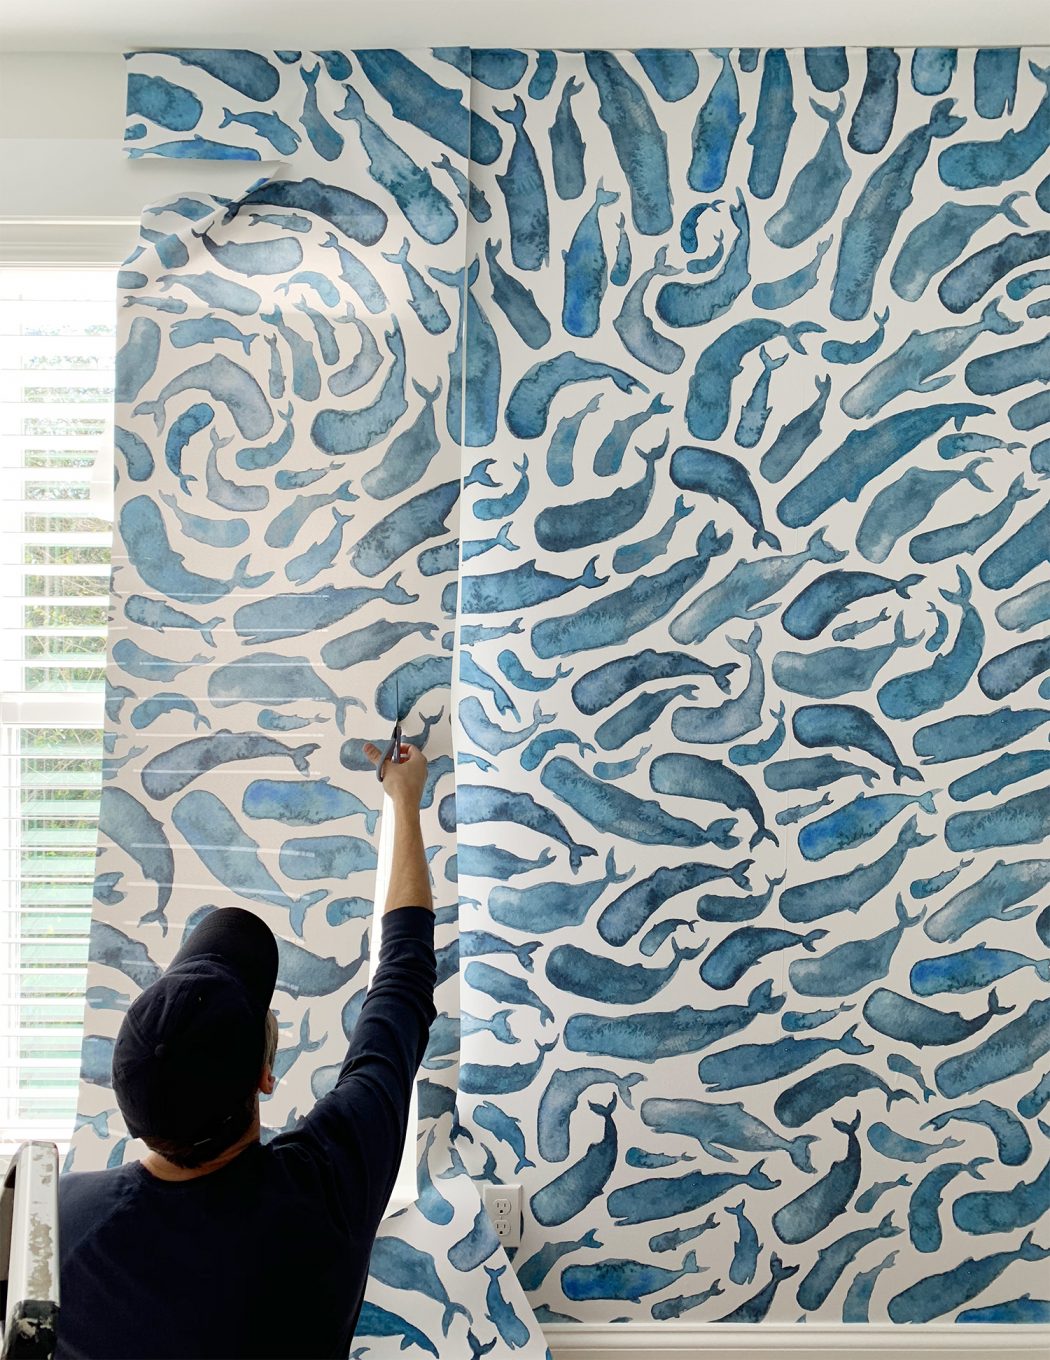 Sherry Trimming Colorful Blue Whale Wall Mural Around Window